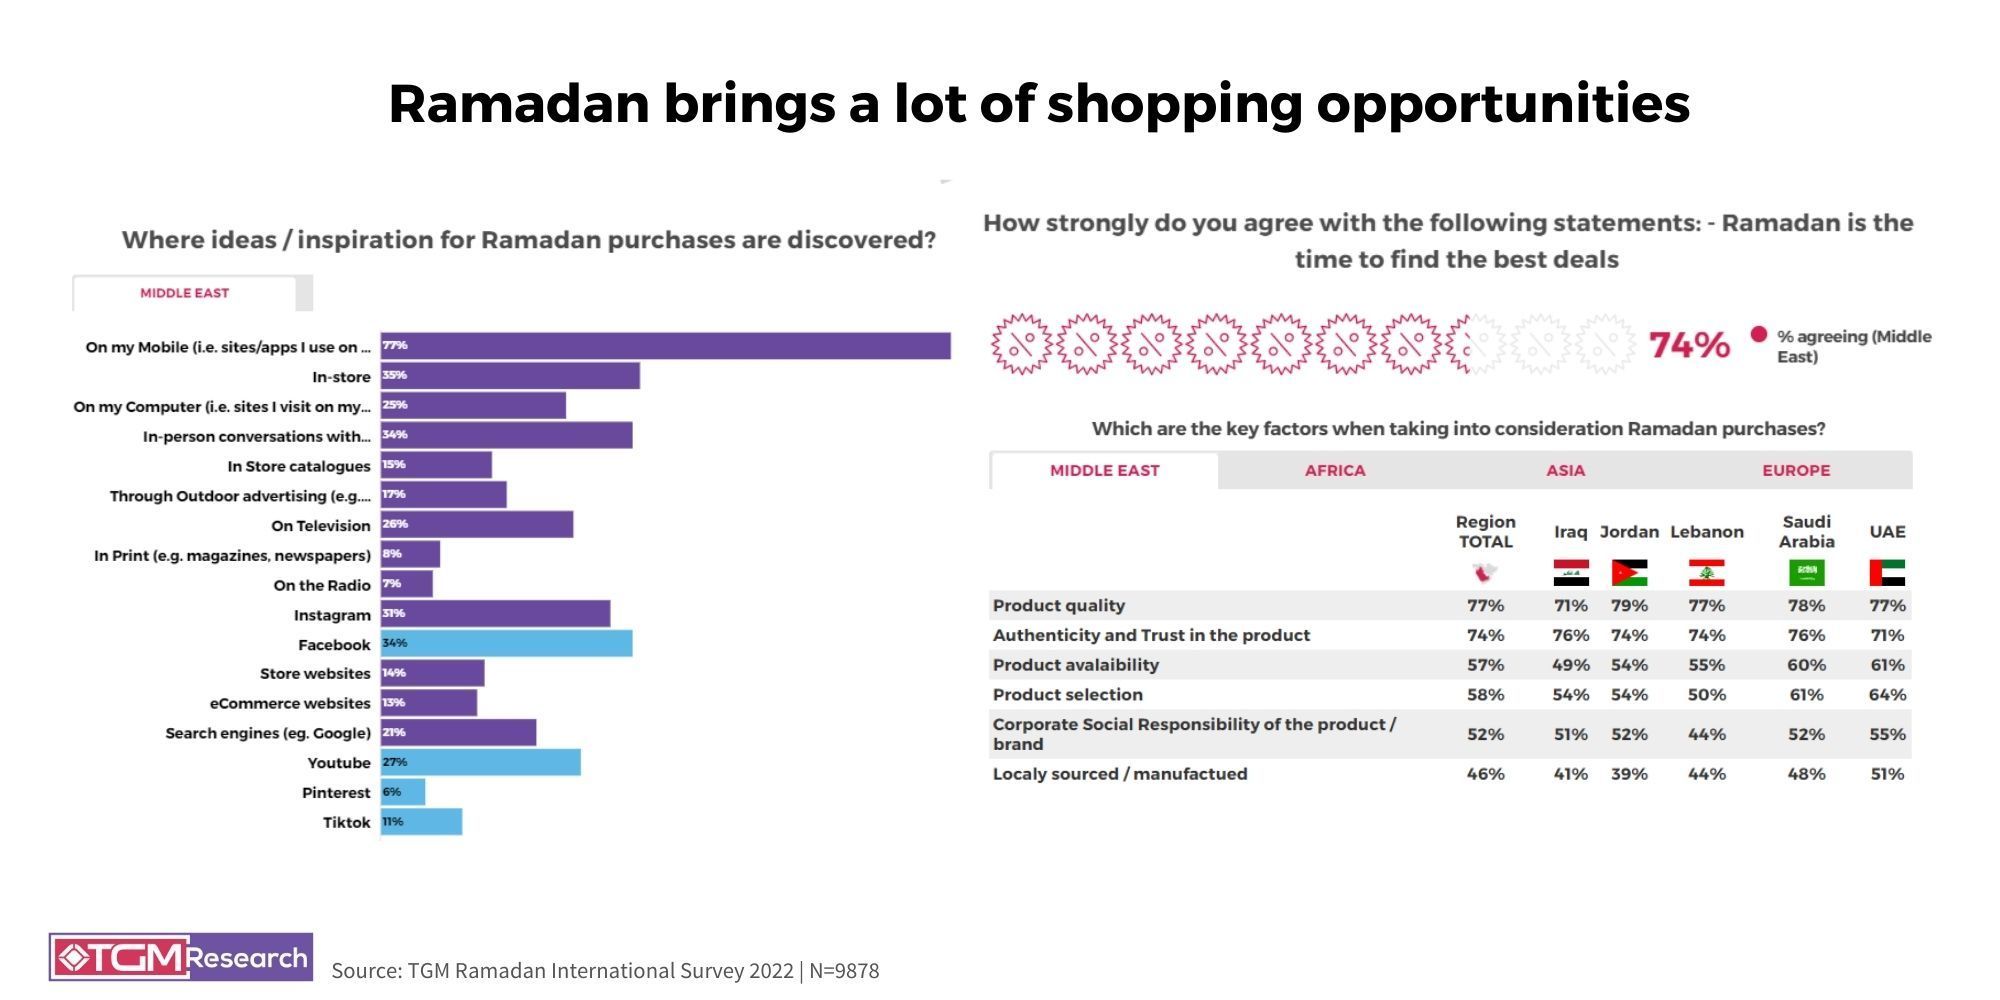 RAMADAN IS THE BIGGEST SPENDING SEASON FOR MUSLIM CONSUMERS. HOW WILL RAMADAN SHOPPING BE DIFFERENT THIS YEAR?